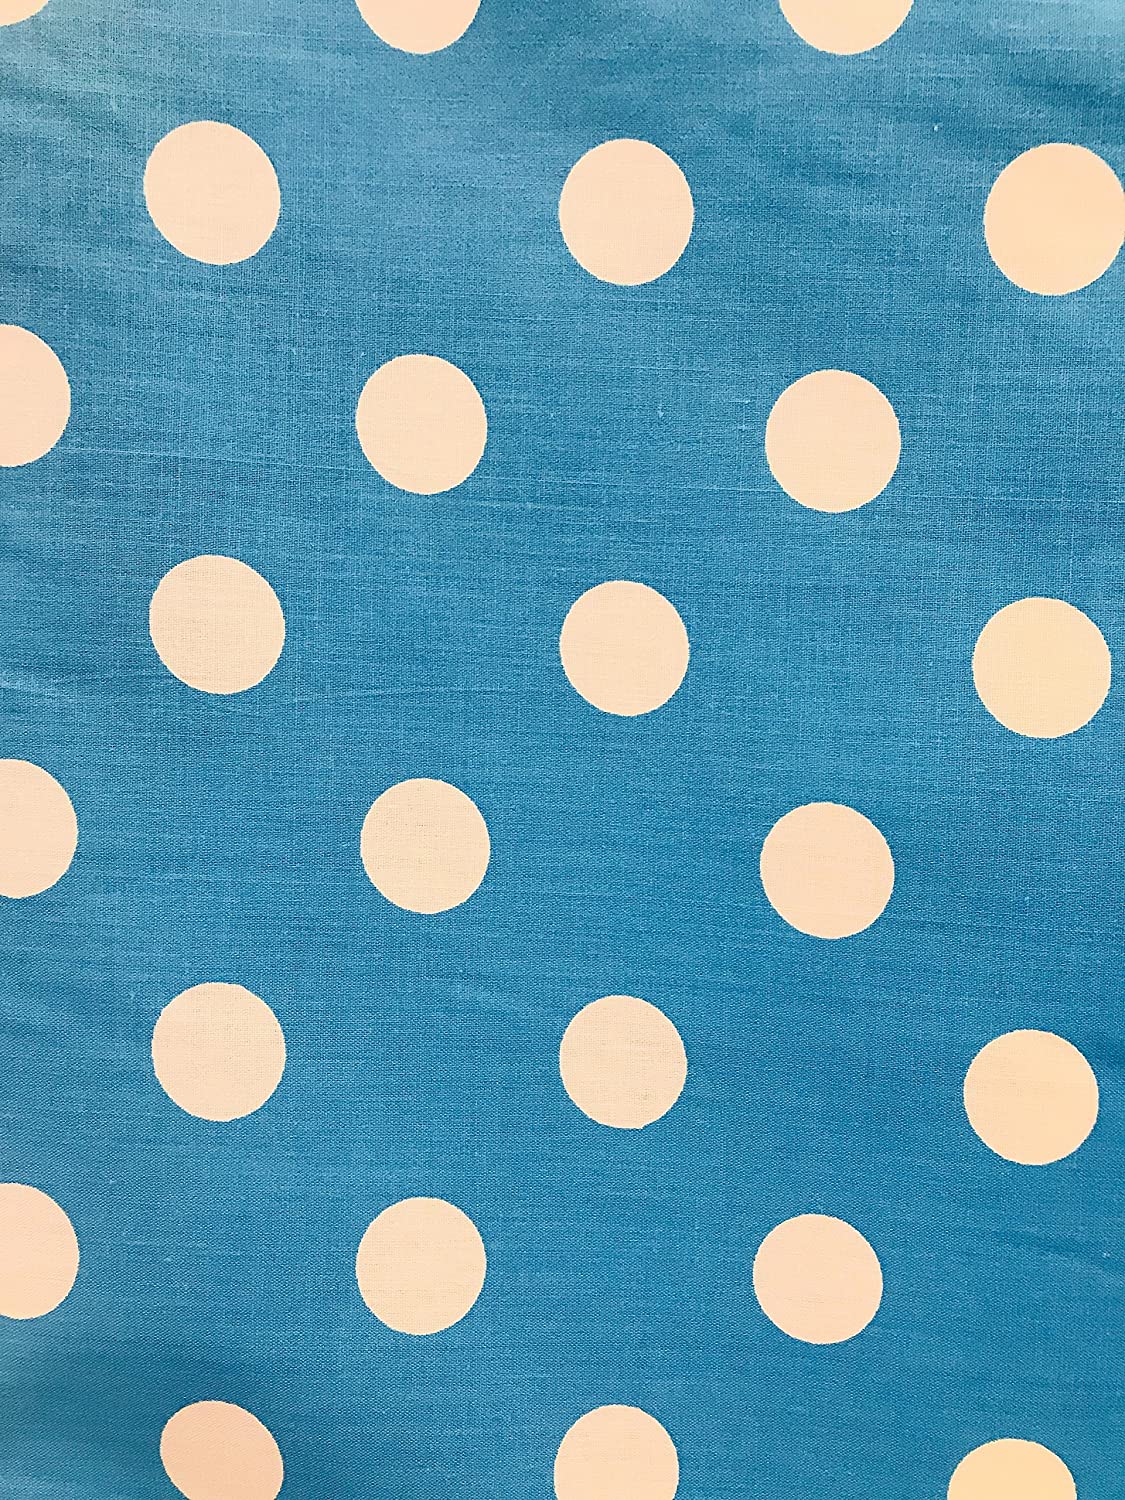 Big Polka Dots Poly Cotton Print Fabric by The Yard (Turquoise/White Dots)